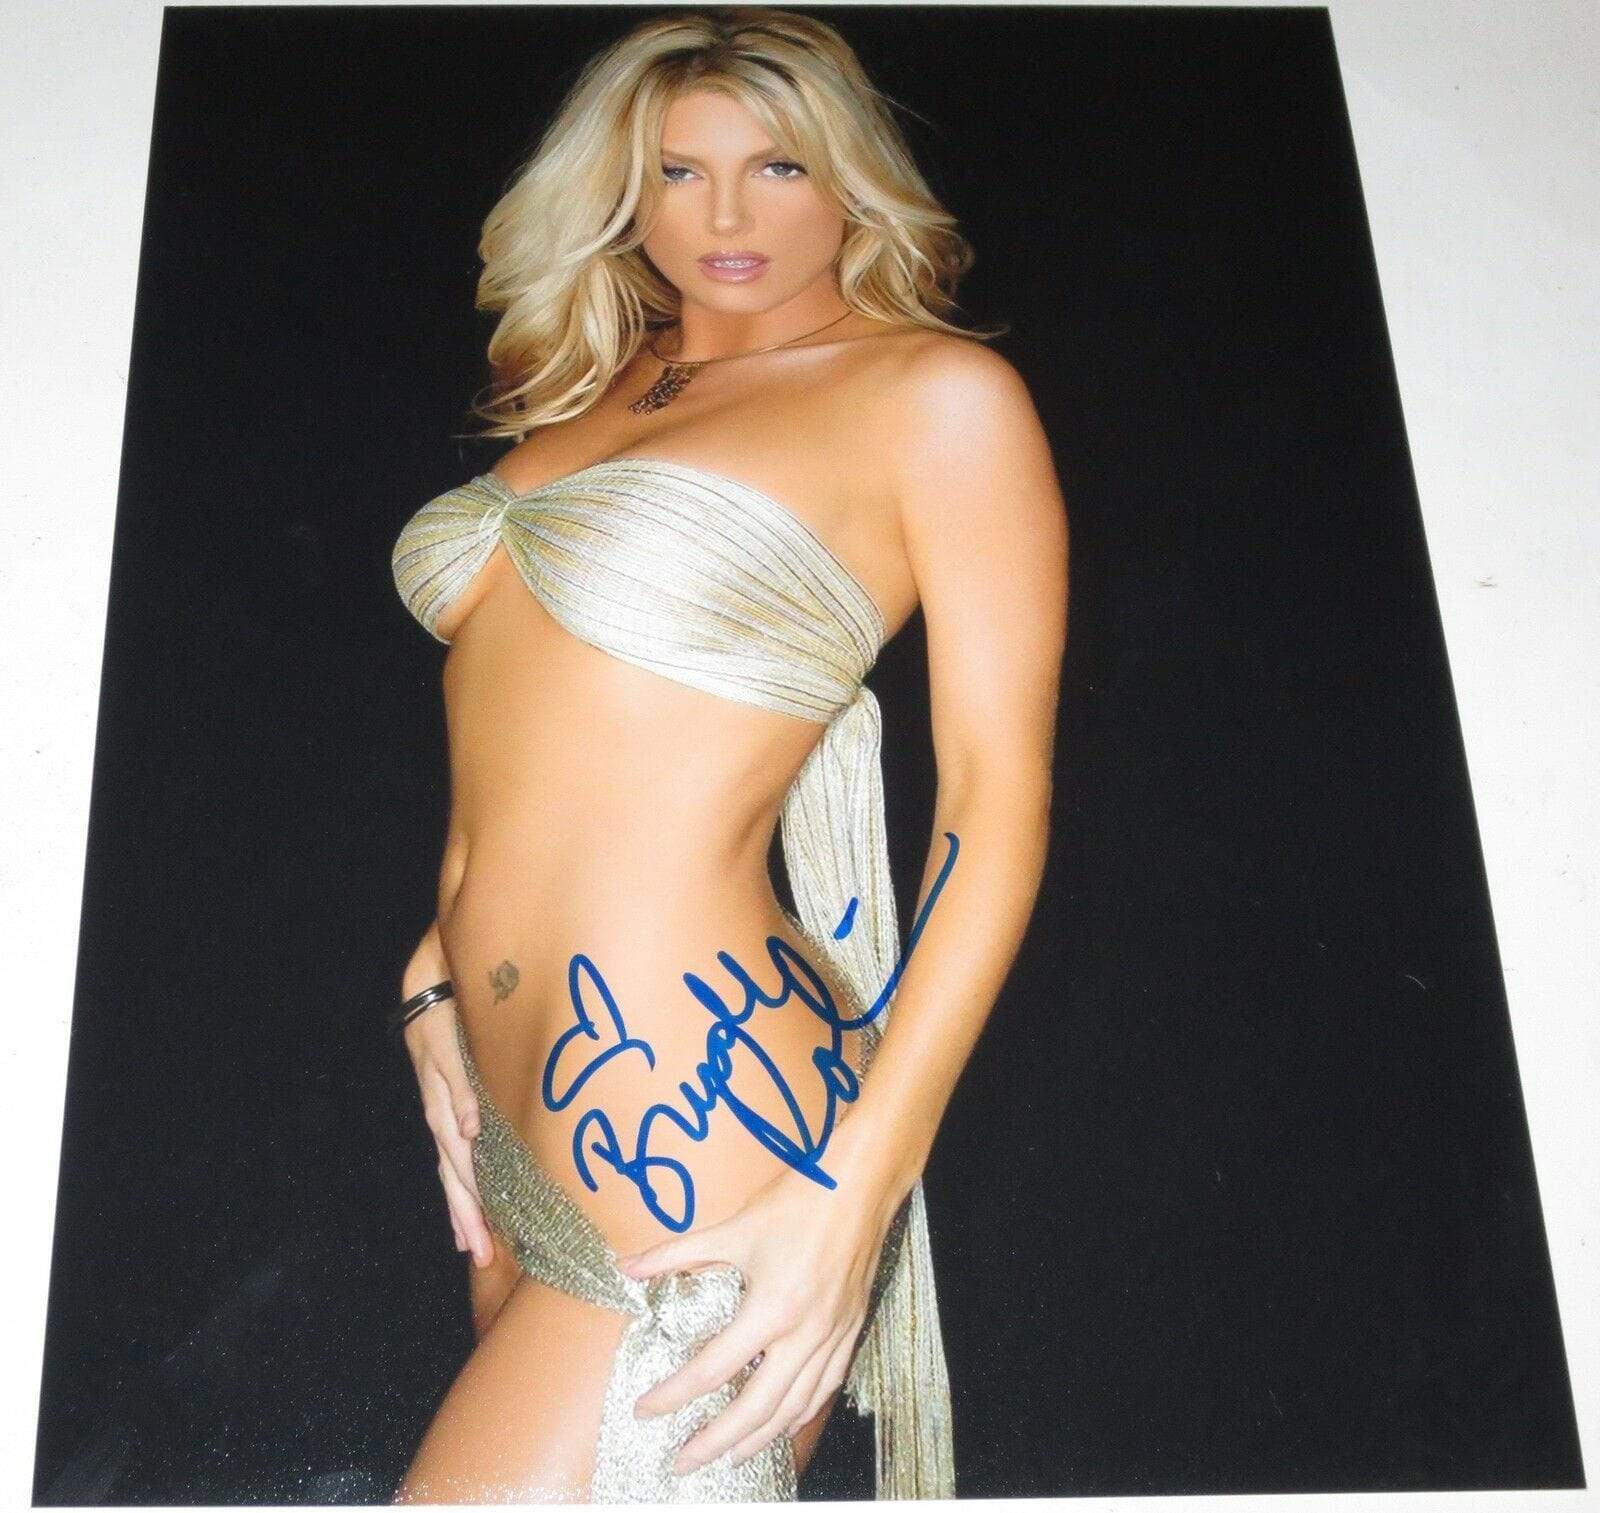 Brande Roderick Authentic Autographed 8x10 Photo - Prime Time Signatures - Personality